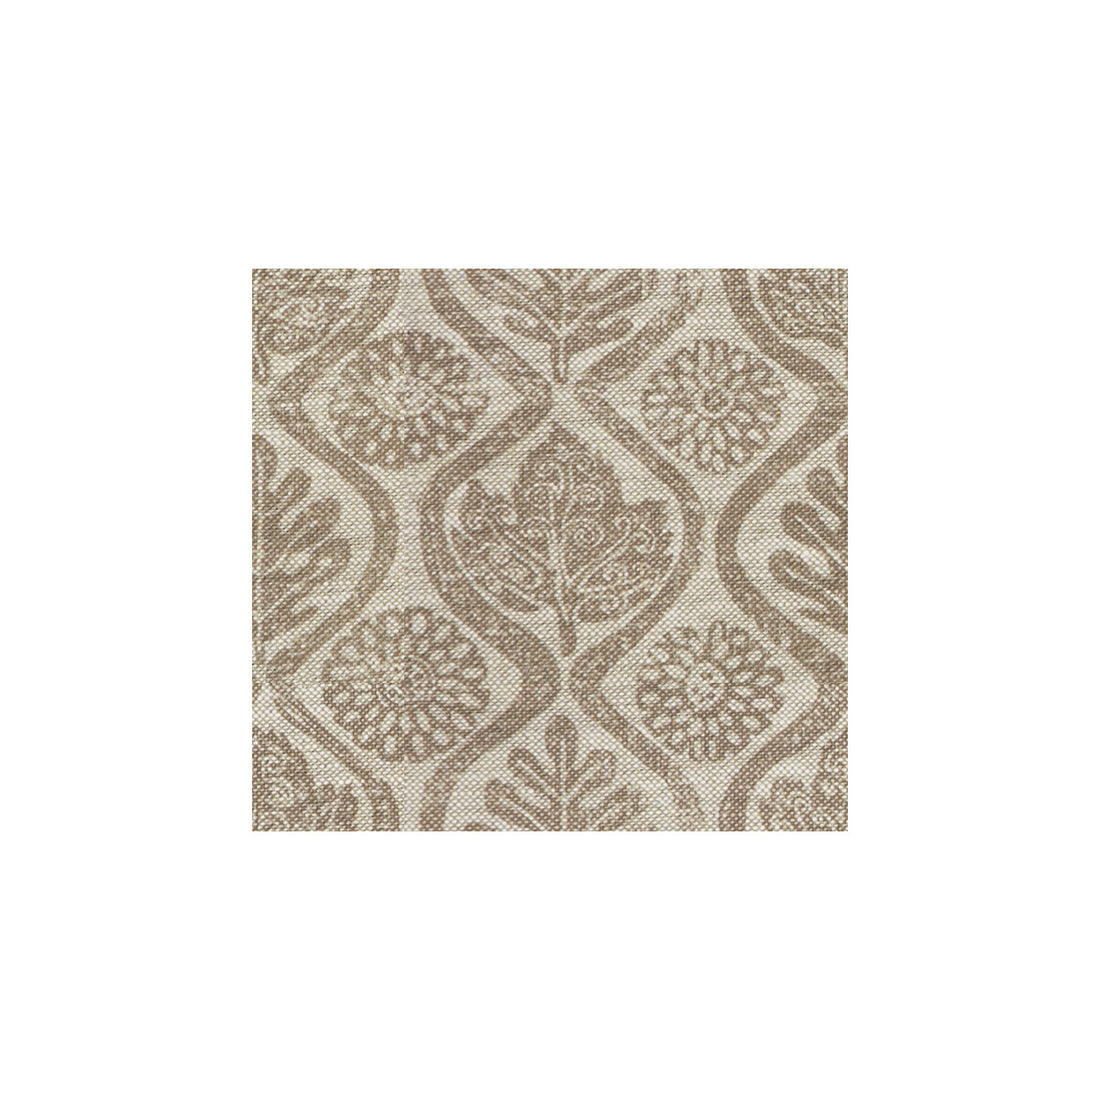 Oakleaves fabric in taupe/oat color - pattern BFC-3515.6.0 - by Lee Jofa in the Blithfield collection